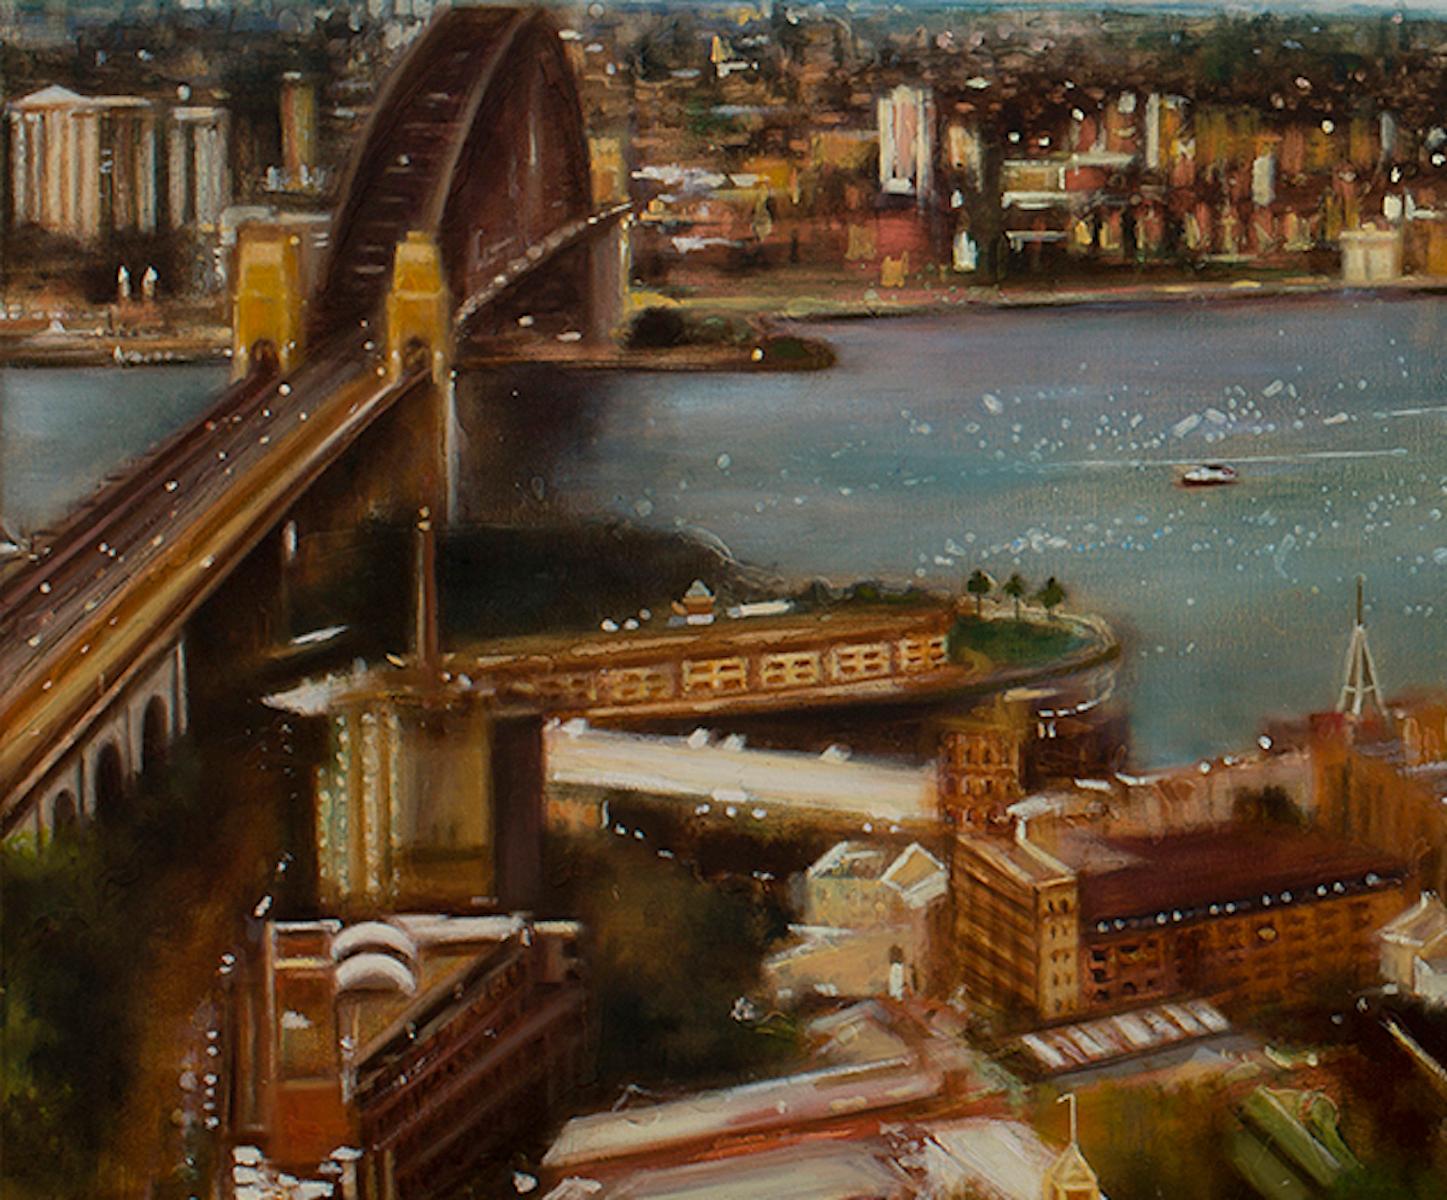 Sydney by Day, Realist Australian Cityscape Painting Sydney, Architecture Art - Gray Figurative Painting by Lesley Anne Derks